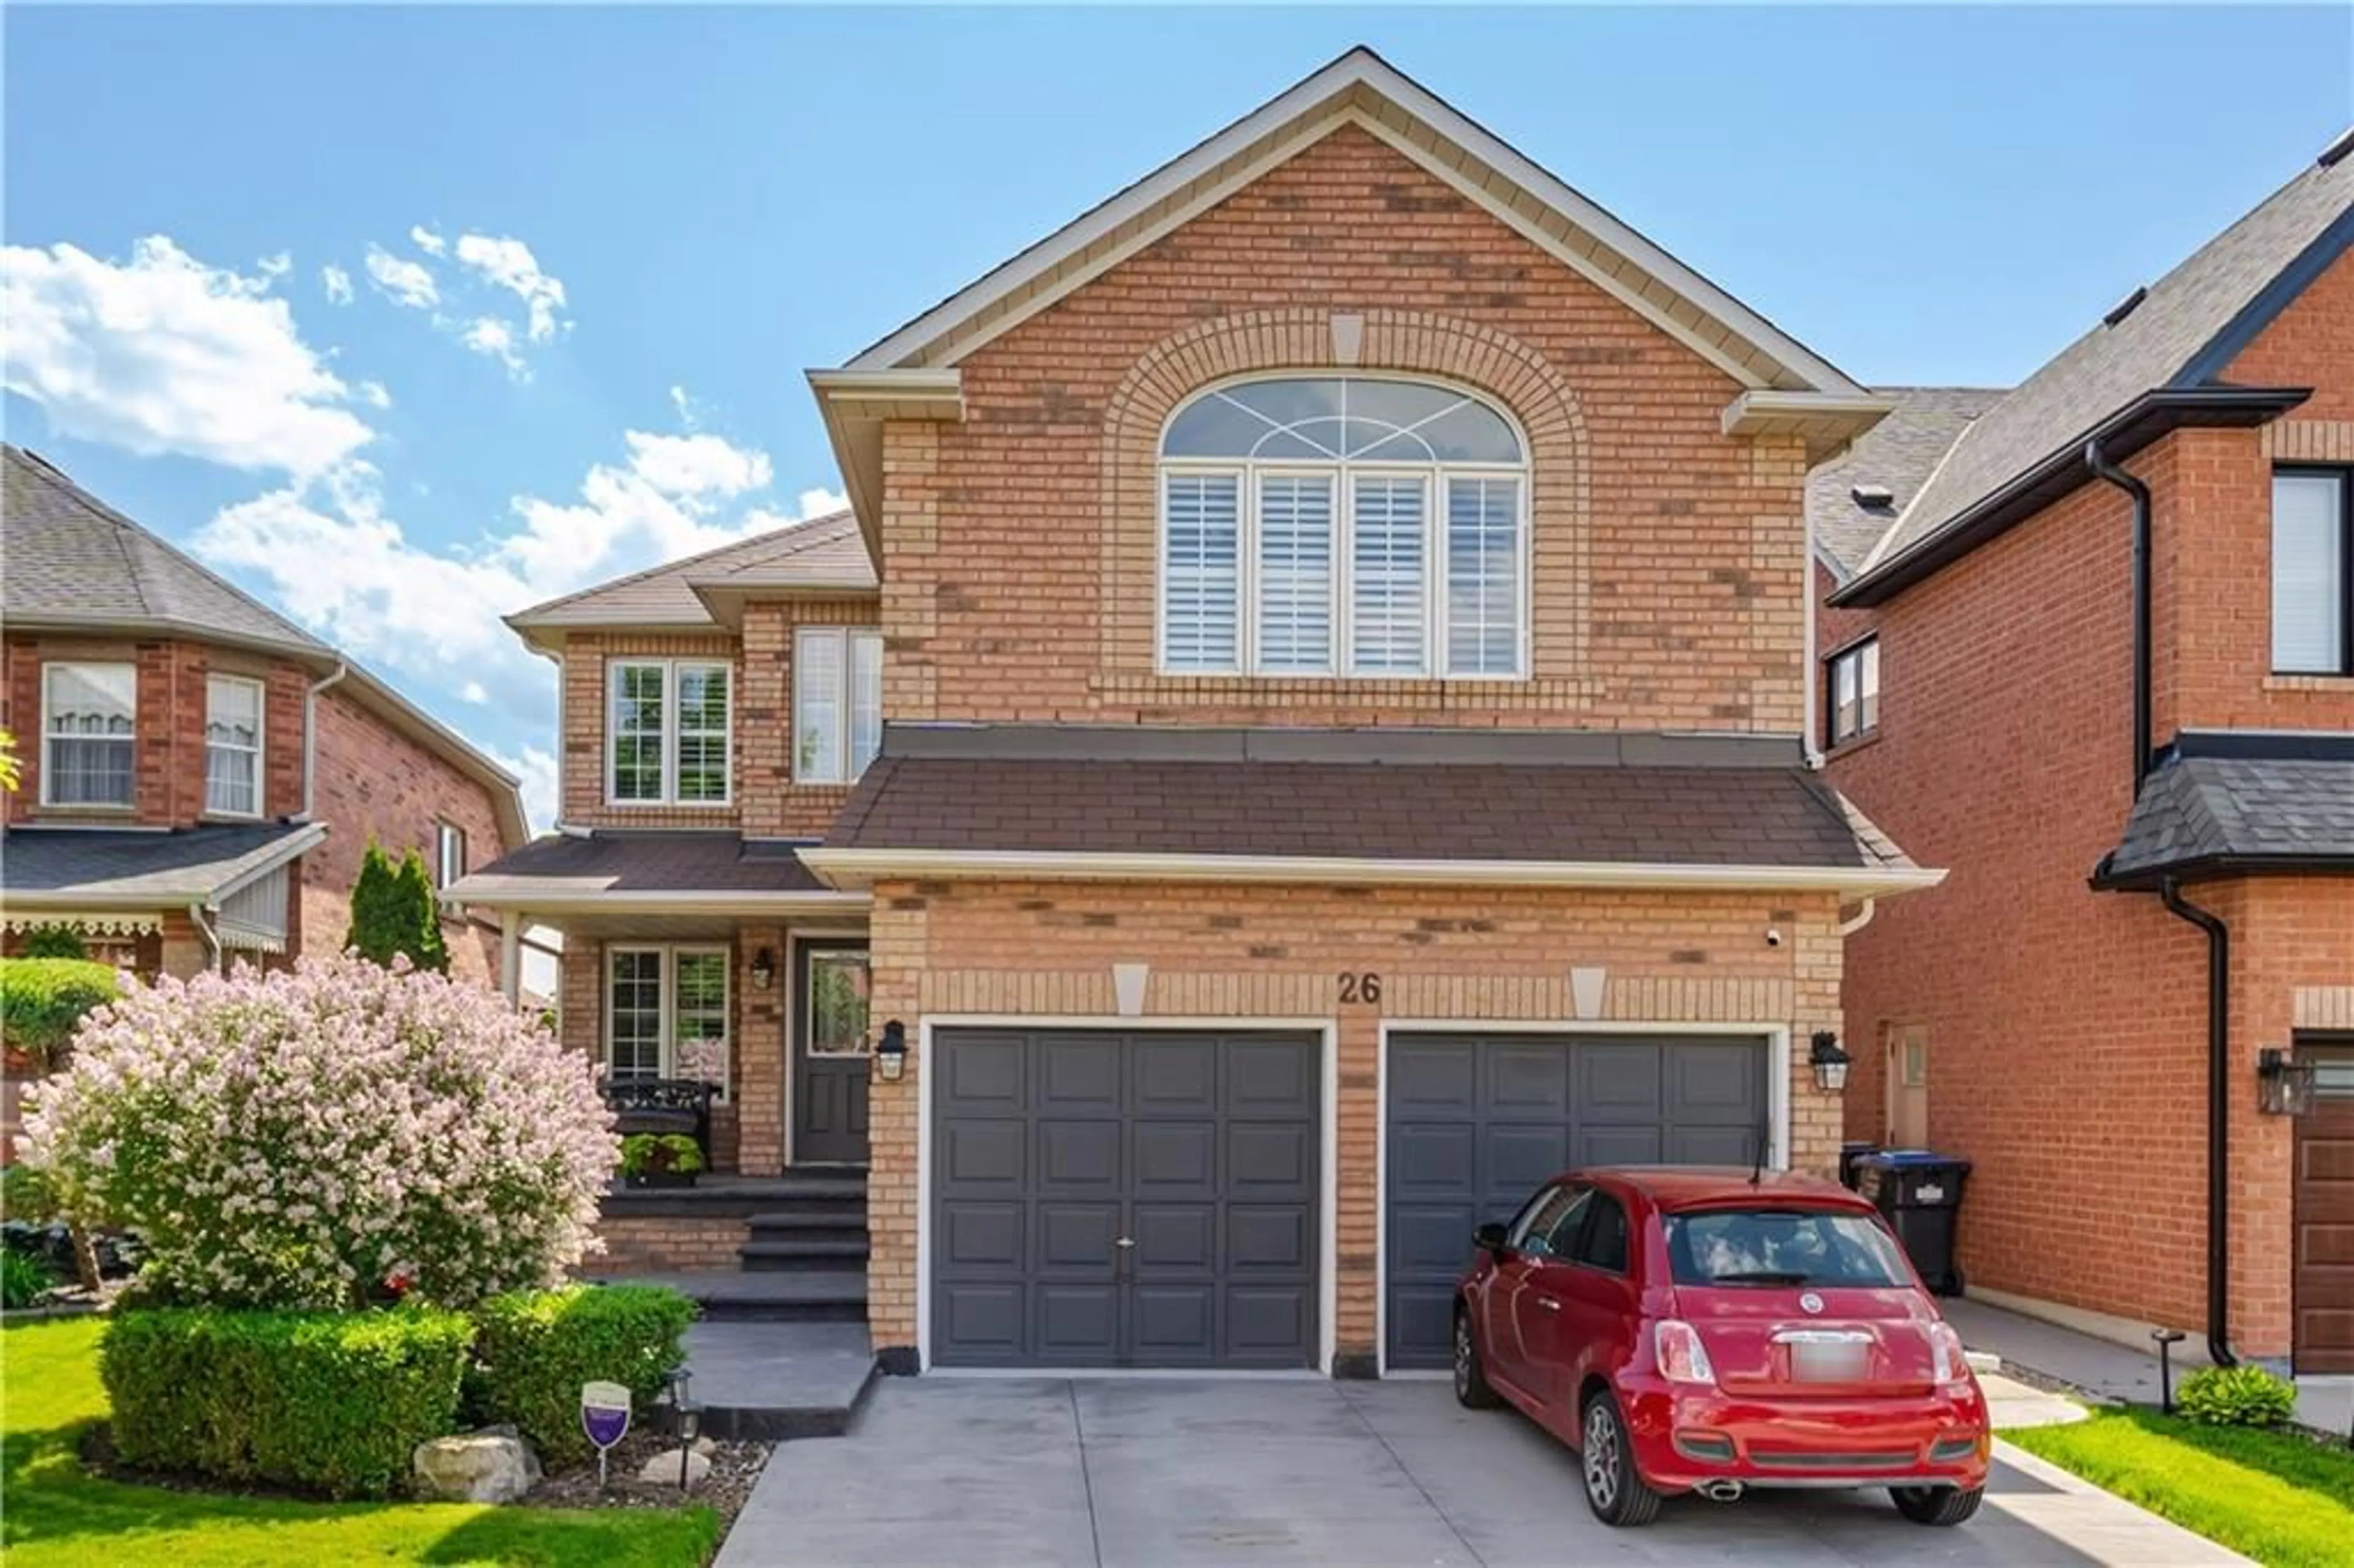 Home with brick exterior material for 26 Baccarat Cres, Brampton Ontario L7A 1K7